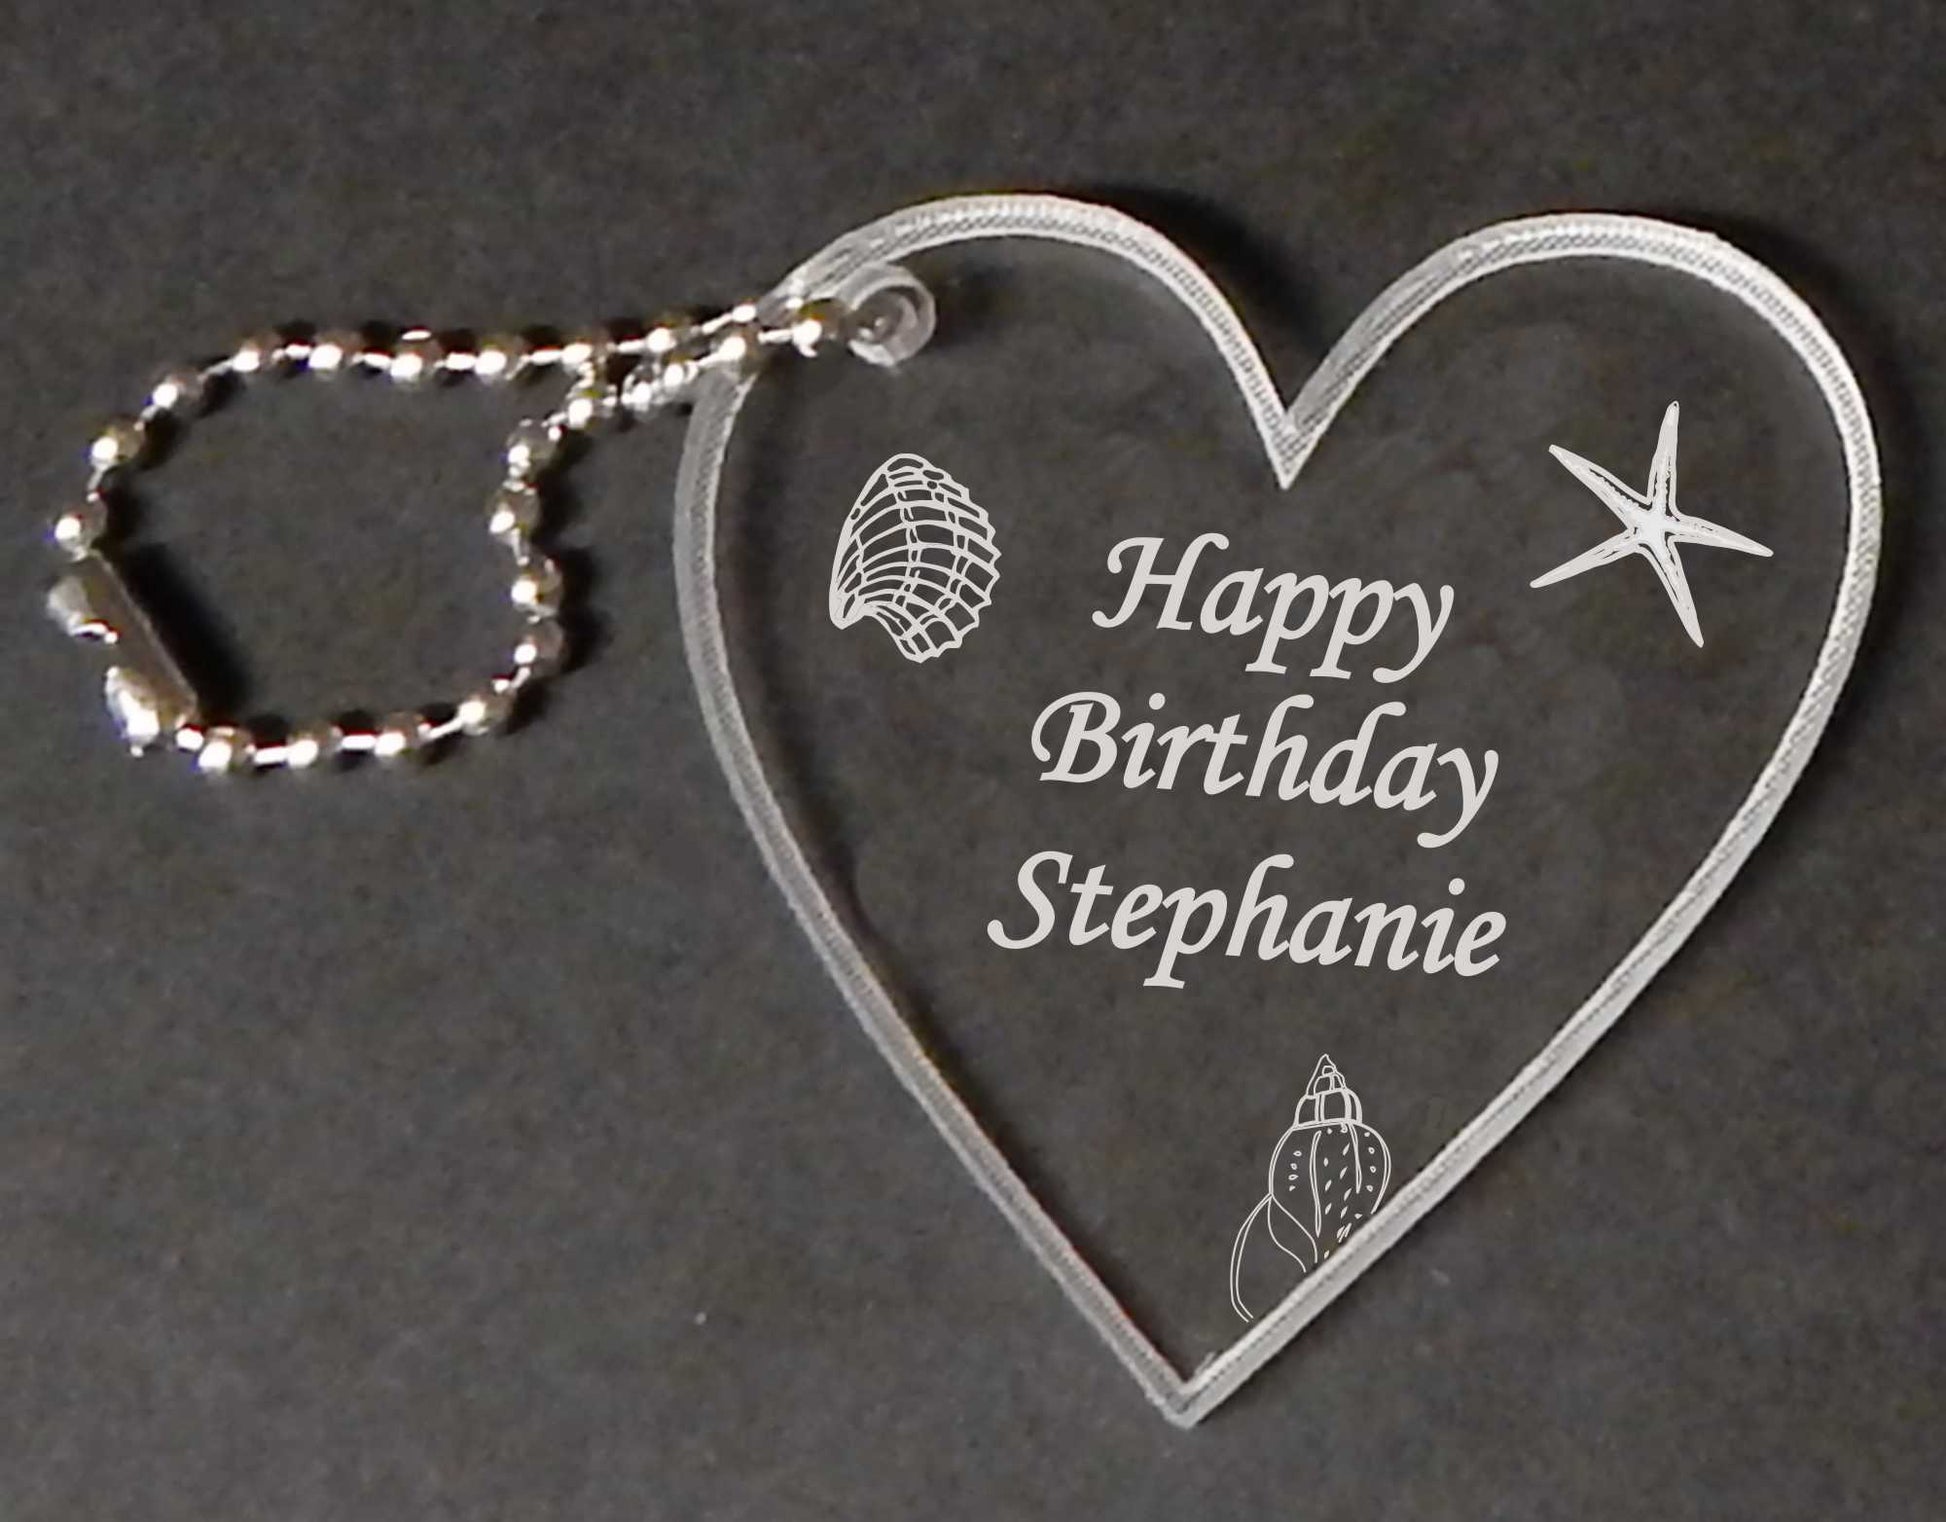 heart shaped keychain designed with seashells and name and Happy Birthday, with a small metal chain attached